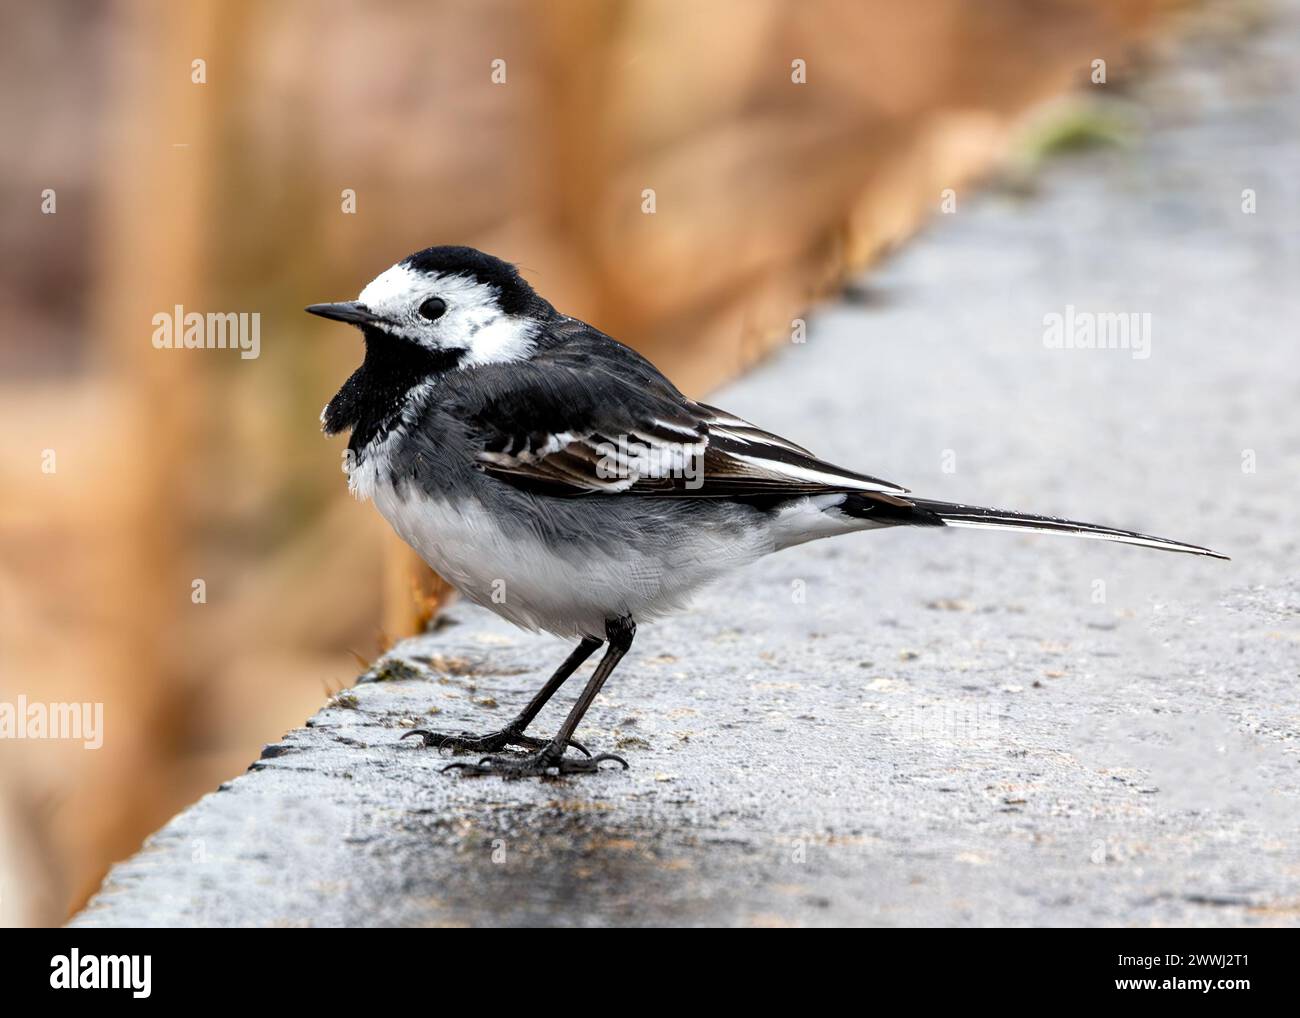 Black & white wagtail with a constantly flicking tail forages along the waterfront in Clontarf, Dublin. Stock Photo